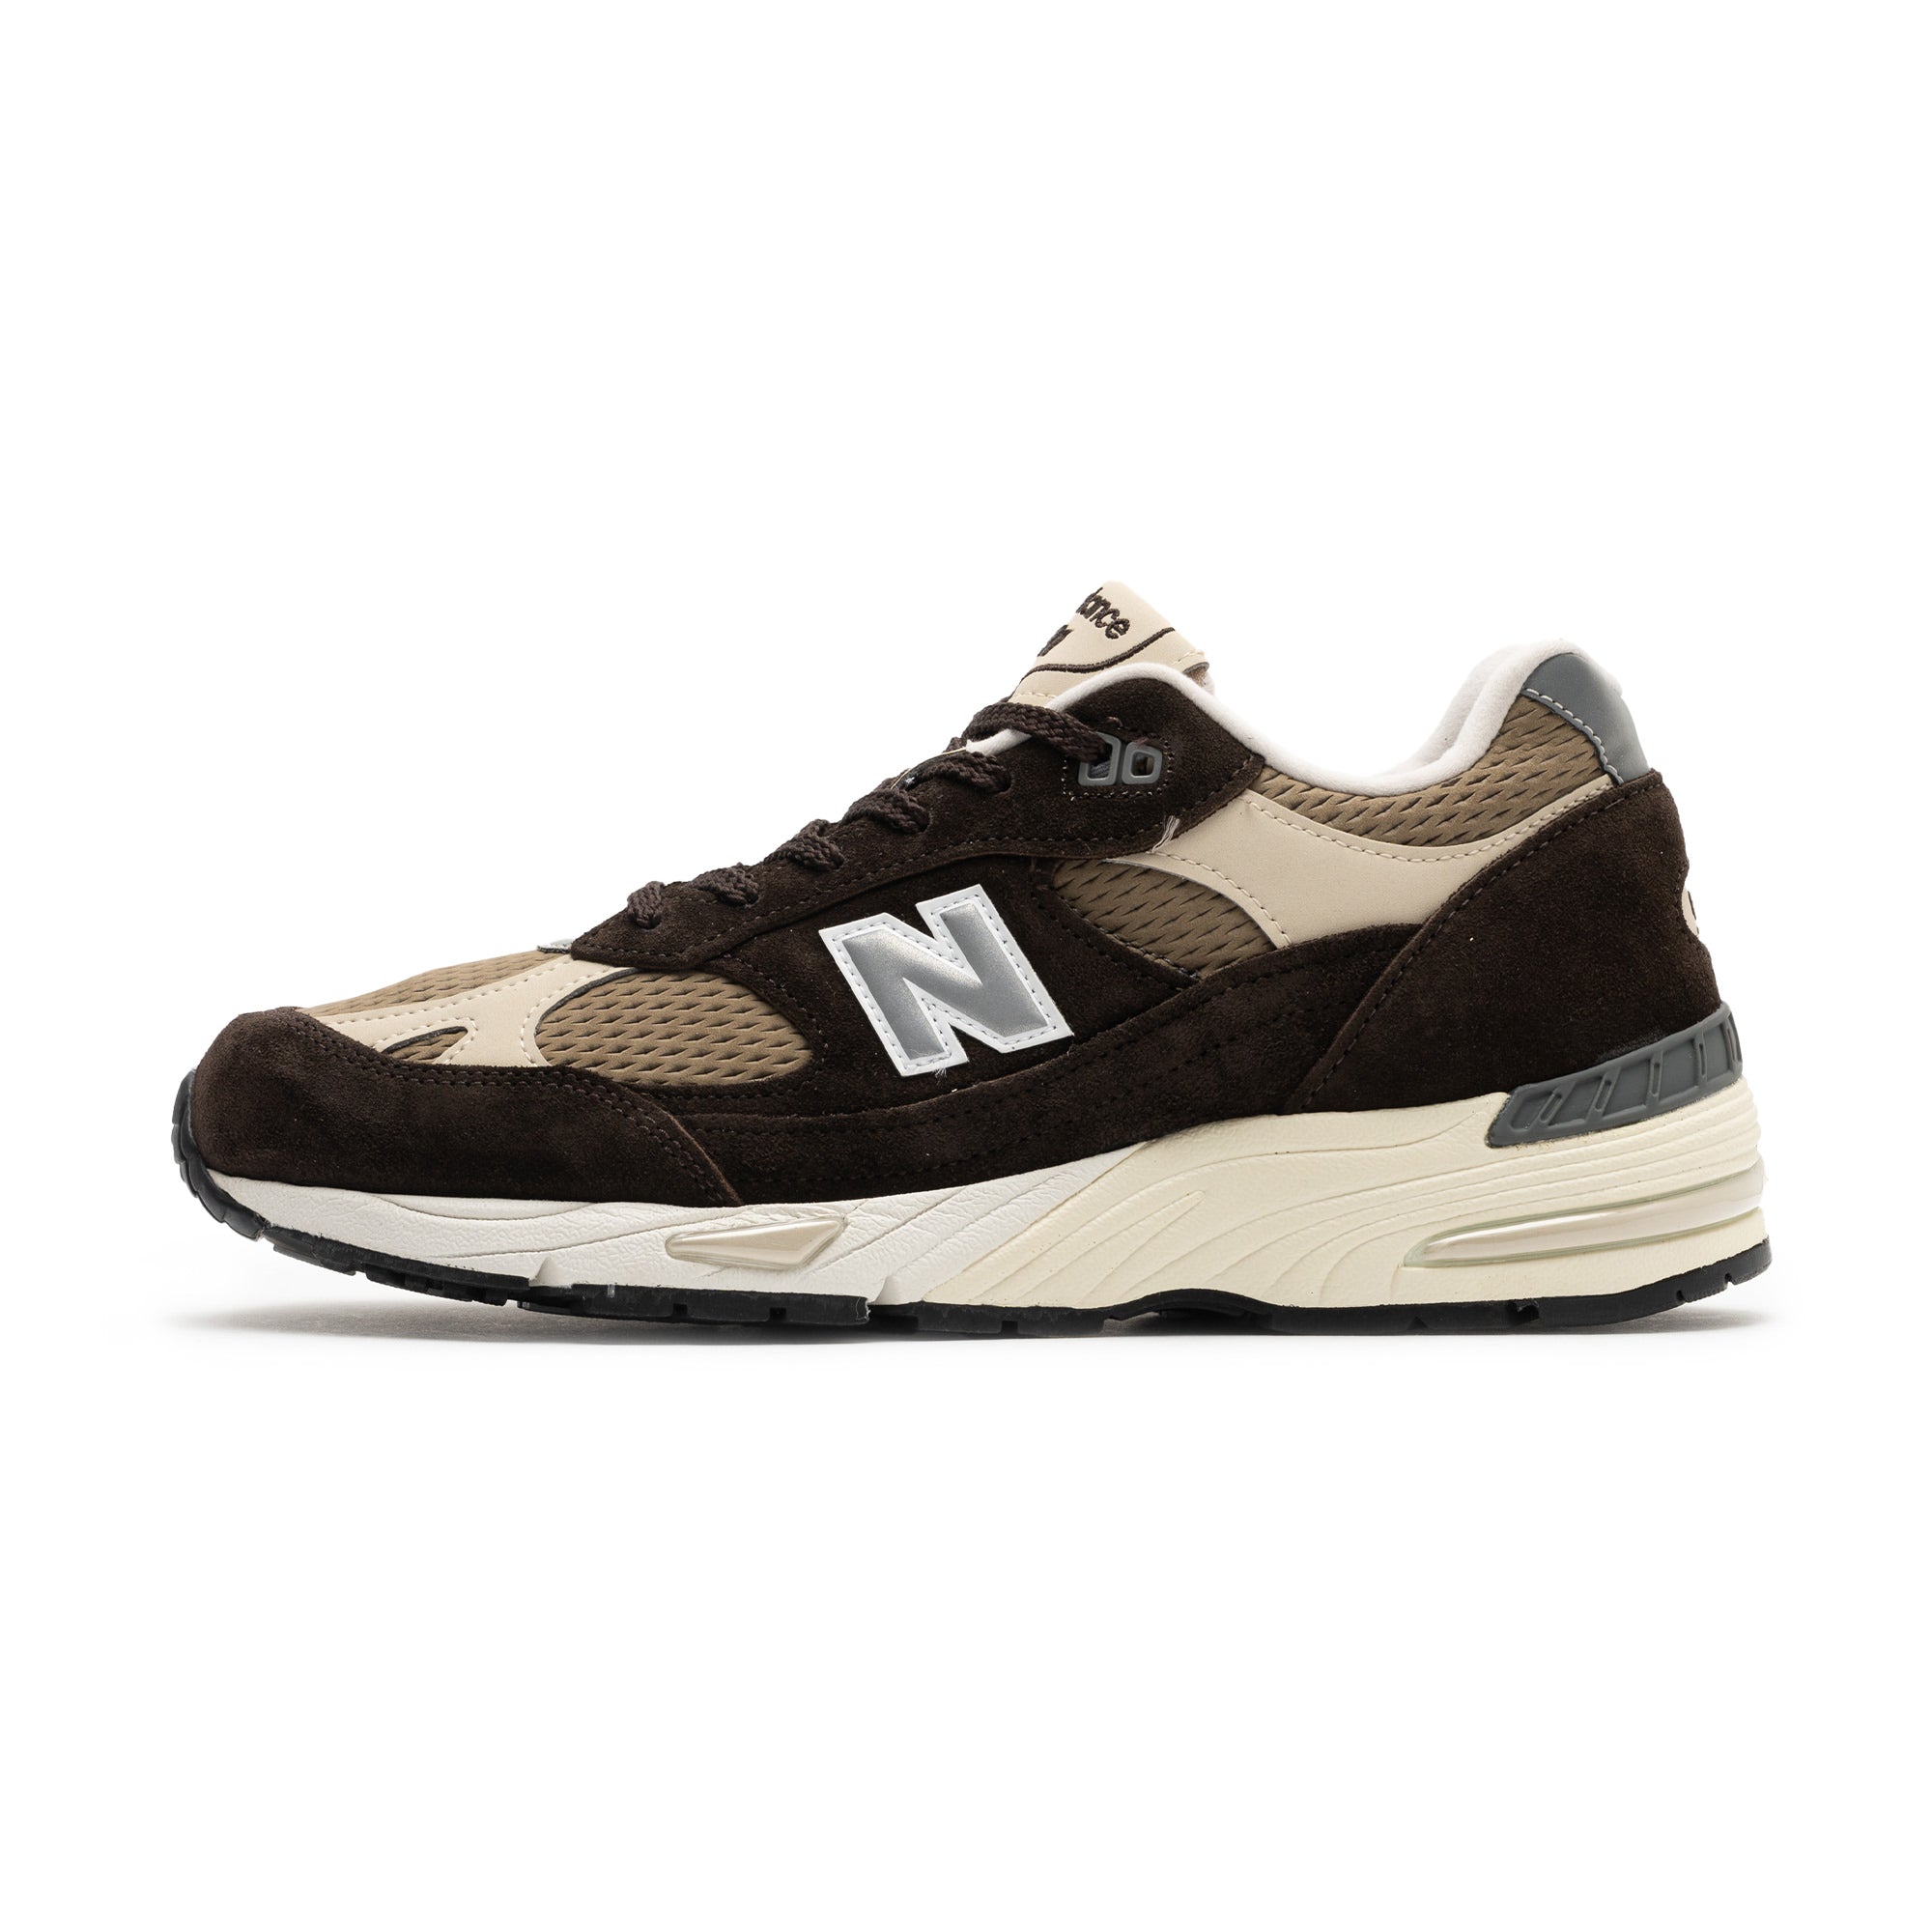 The latest New Balance Women's 696 Re-Engineered expands their women's collection for